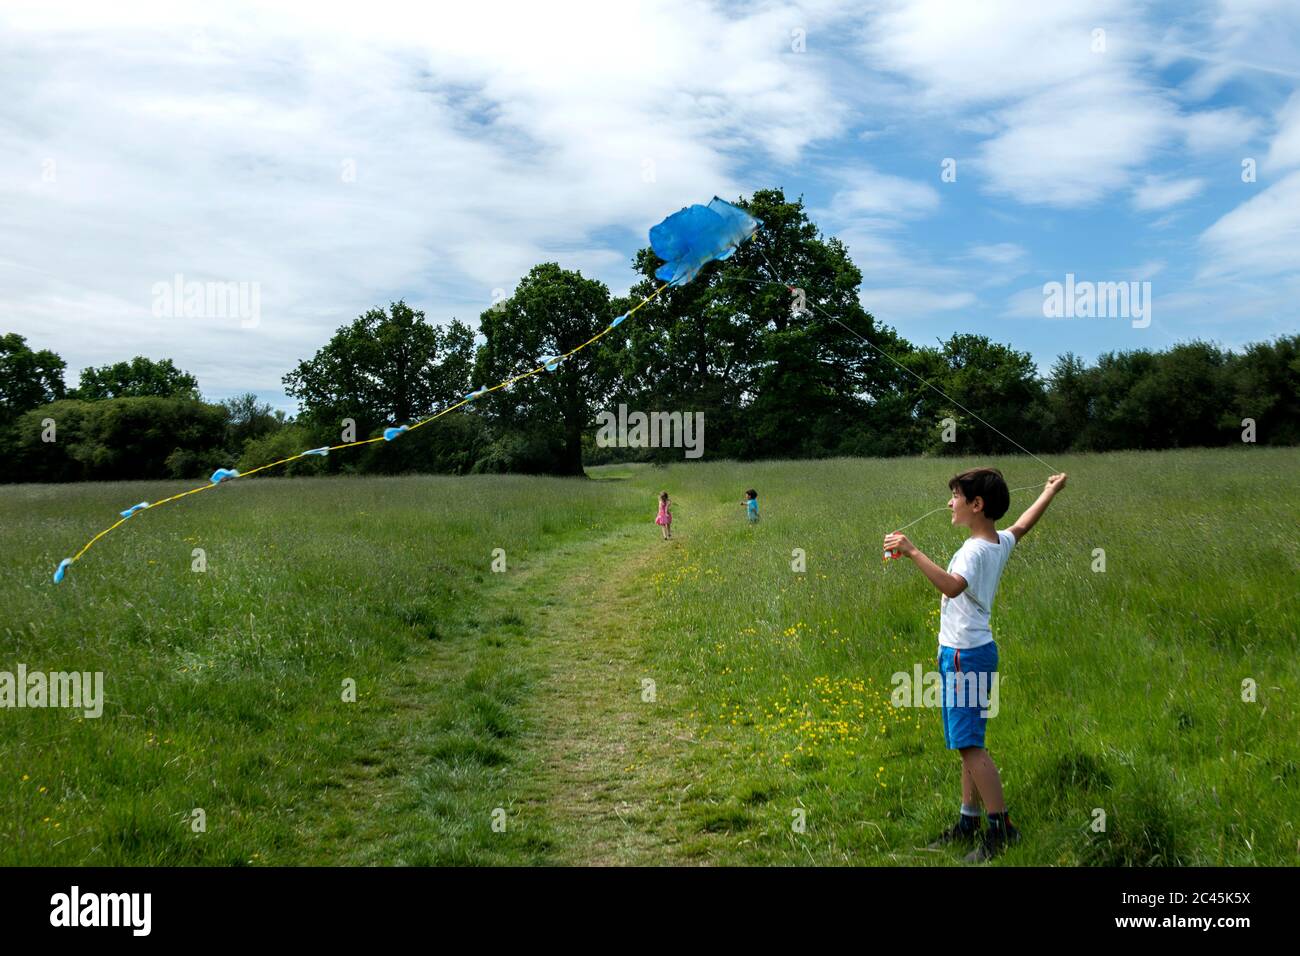 Young boy standing on a meadow, flying blue kite. Stock Photo